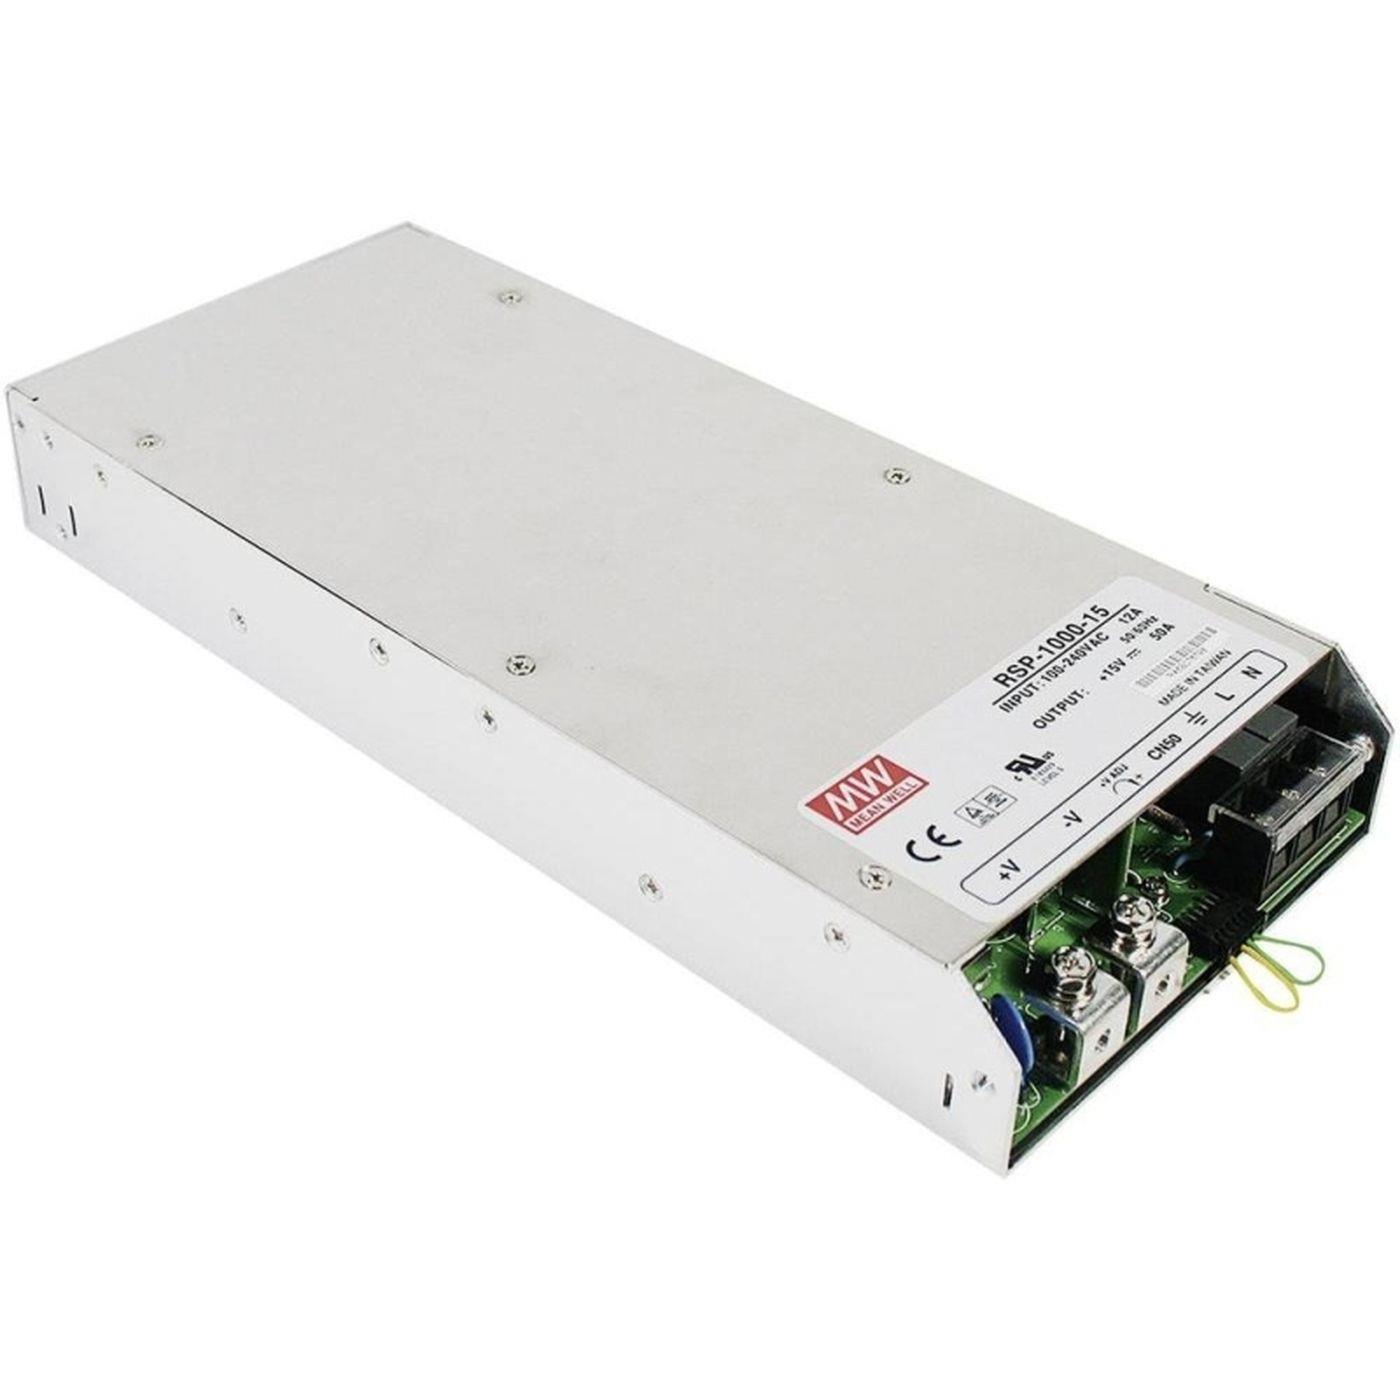 RSP-1000-48 1000W 48V 21A Industrial power supply